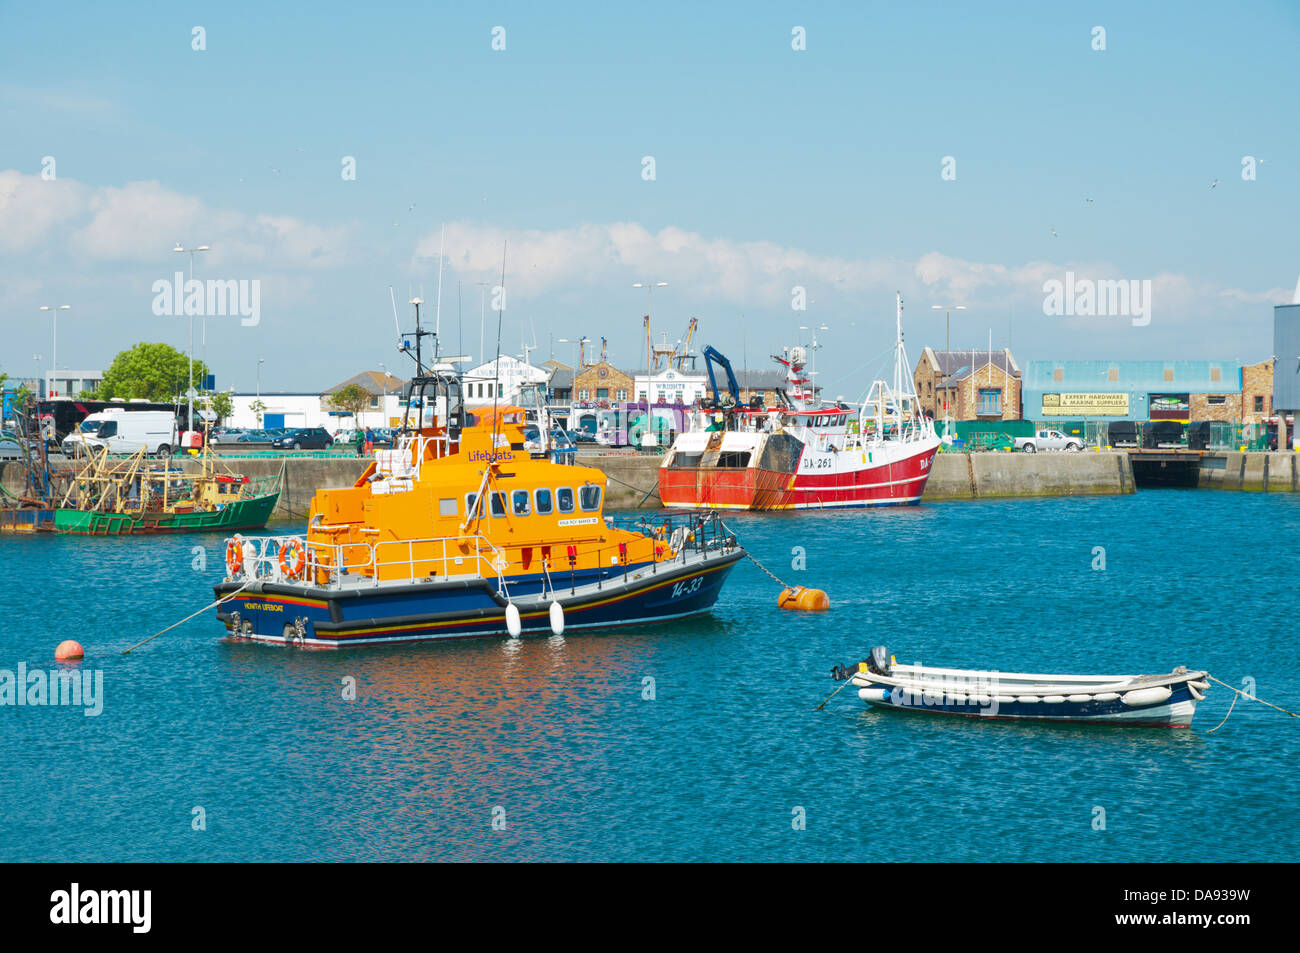 Boats Howth Fishery Harbour Centre in harbour Howth peninsula near Dublin Ireland Europe Stock Photo